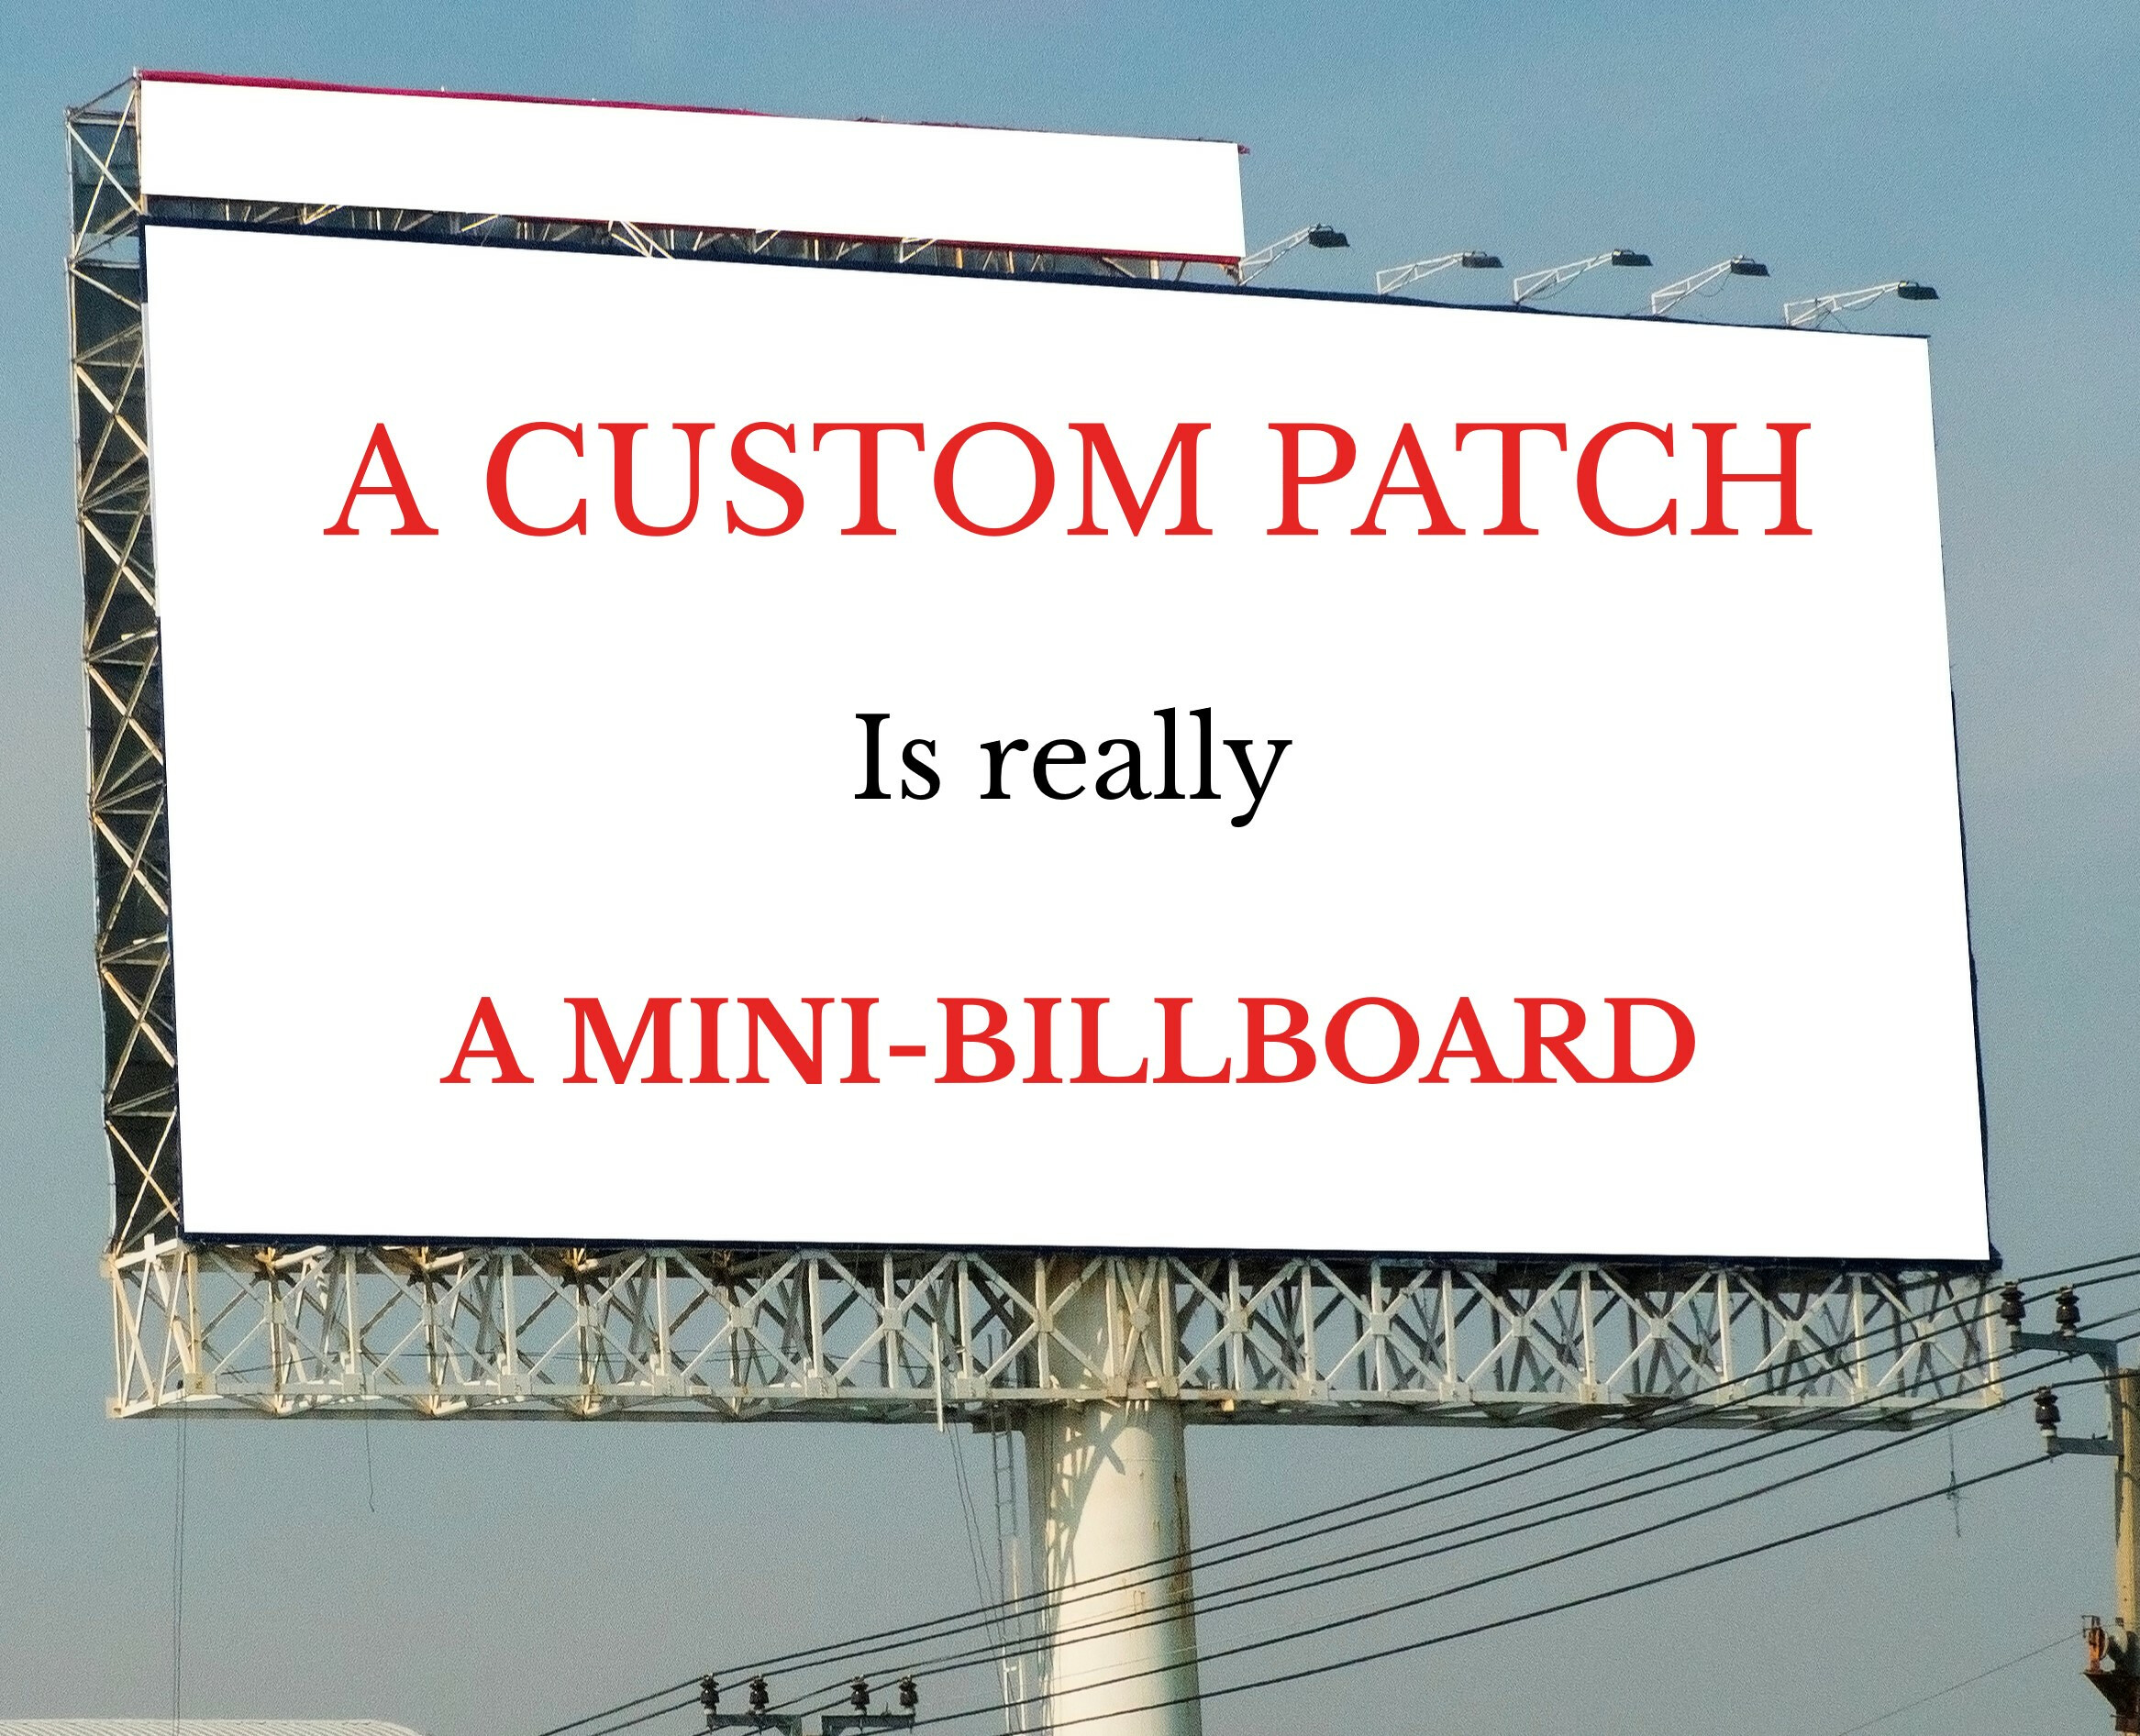 Custom Patches: Wearable Billboards for Your Brand